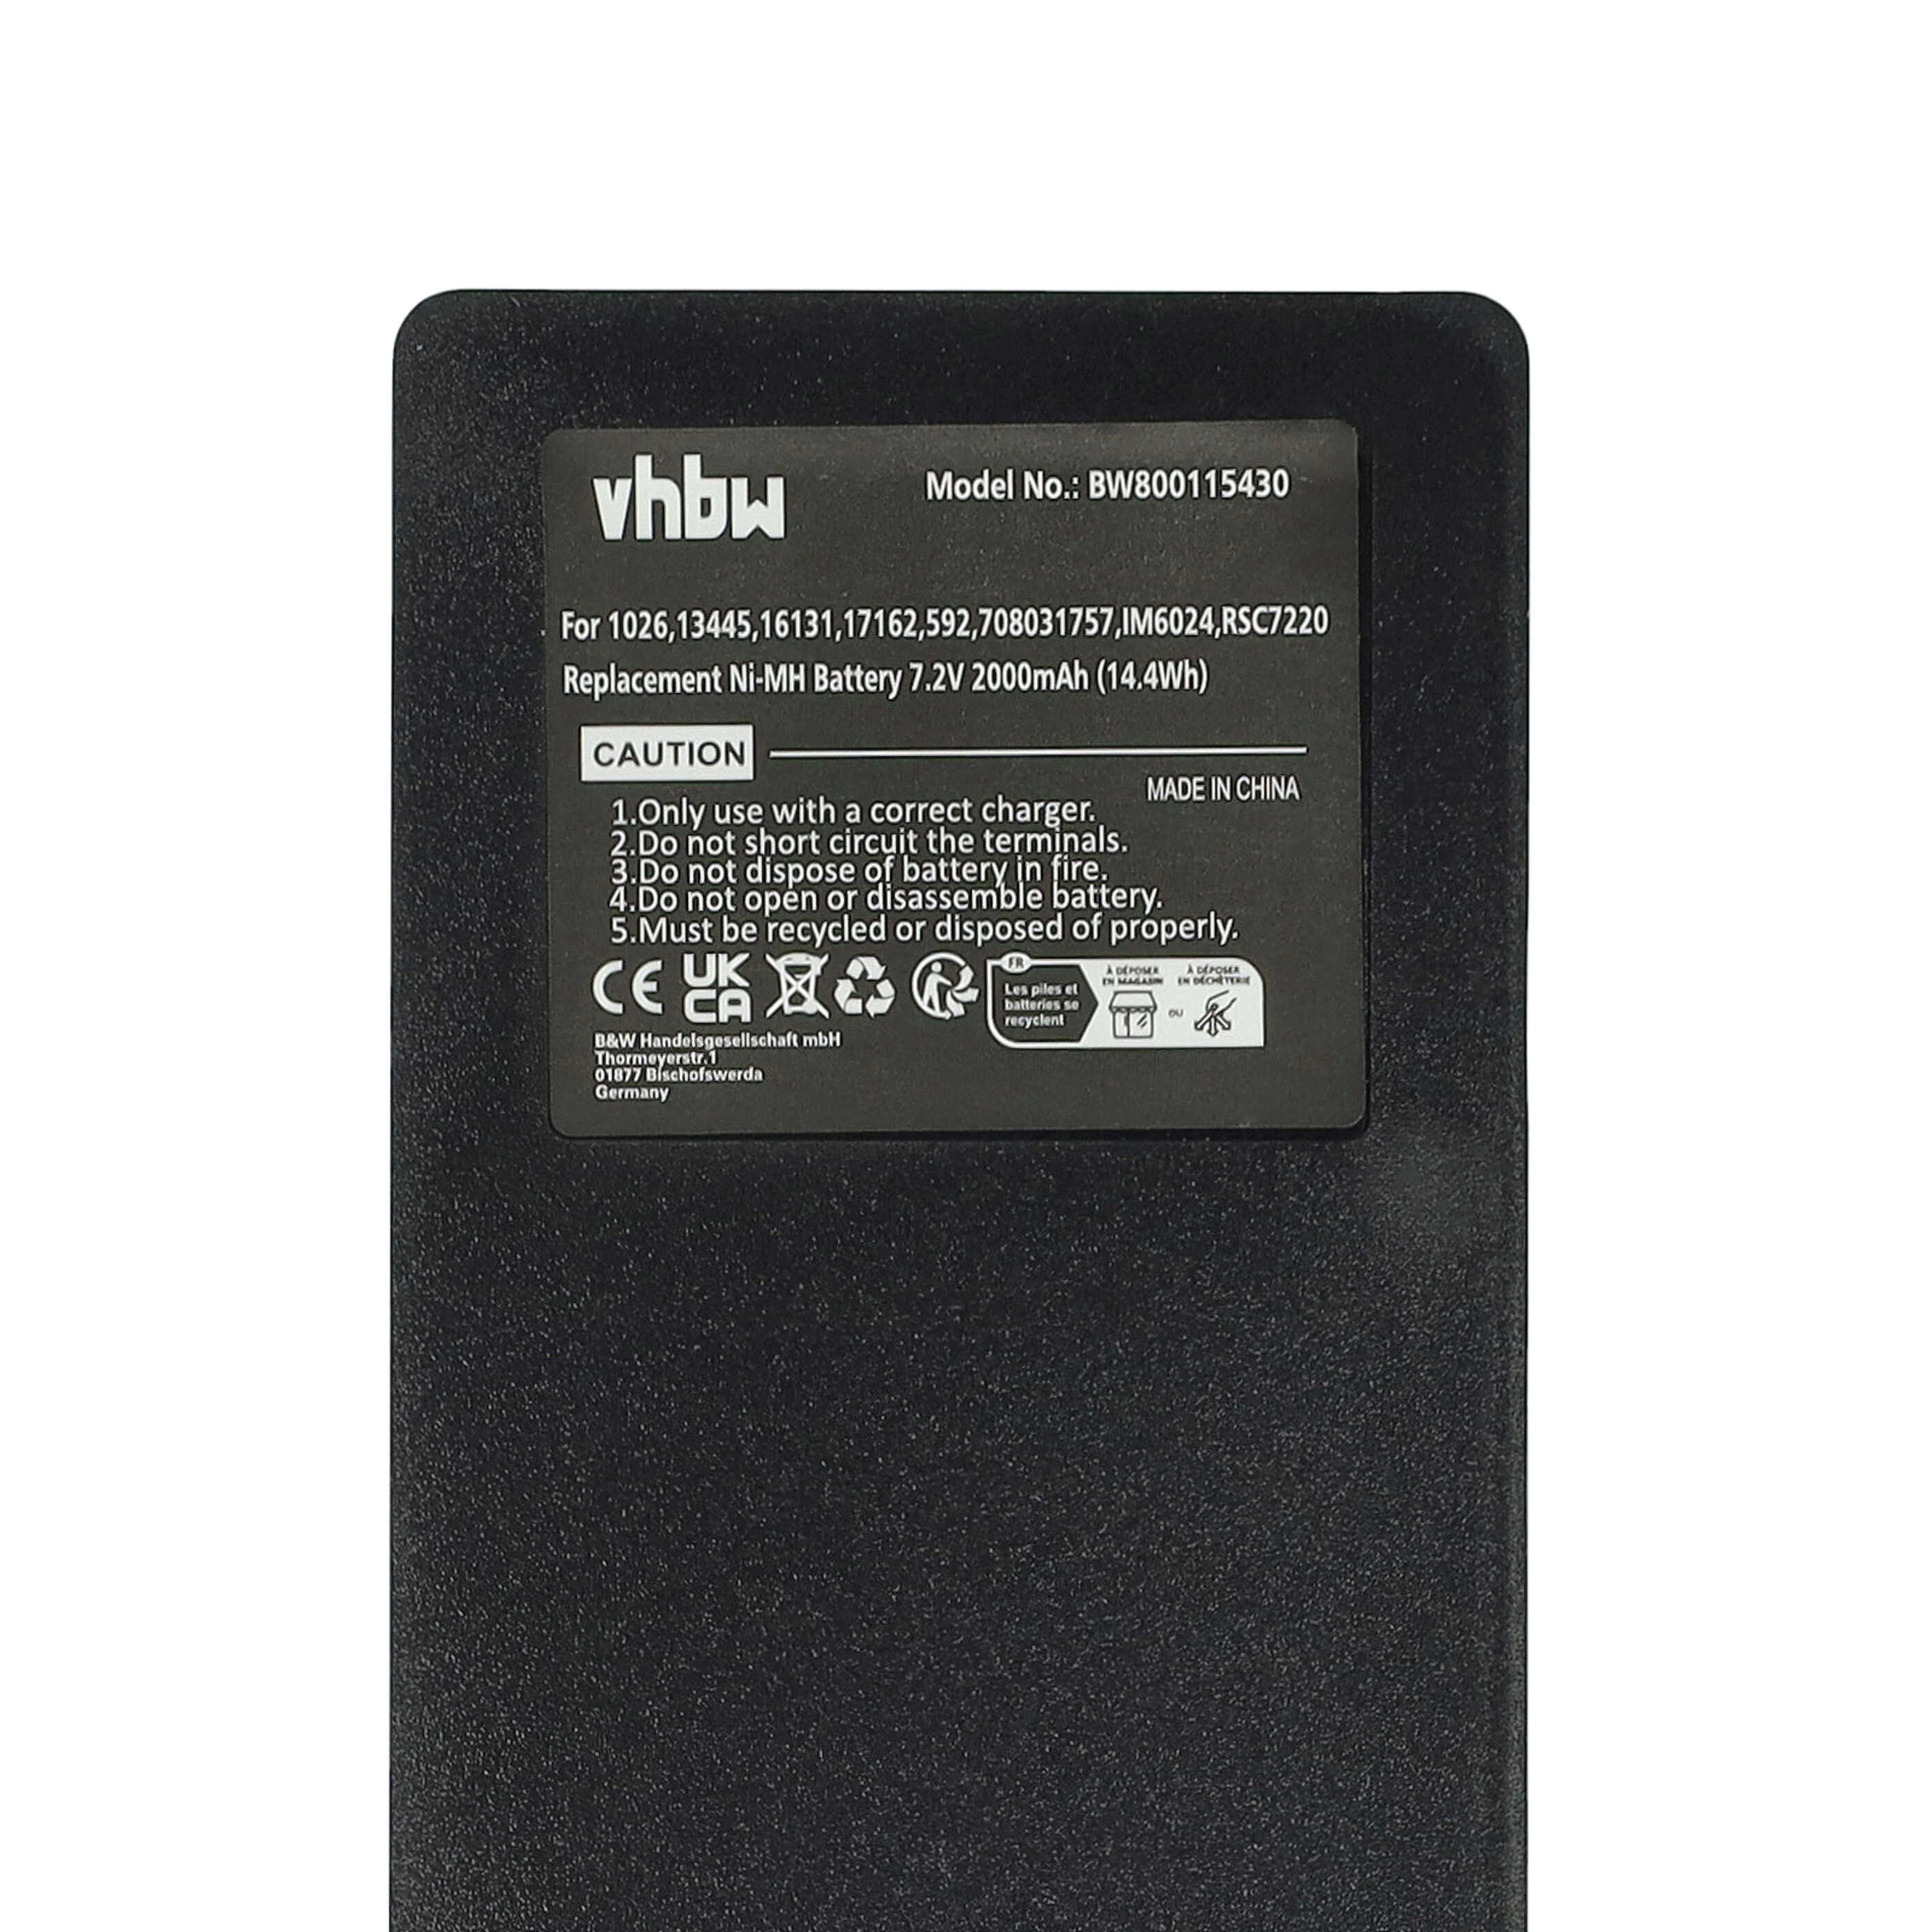 Industrial Remote Control Replacement Battery for Palfinger / Scanreco 590, 592, RC400 - 2000mAh 7.2V NiMH